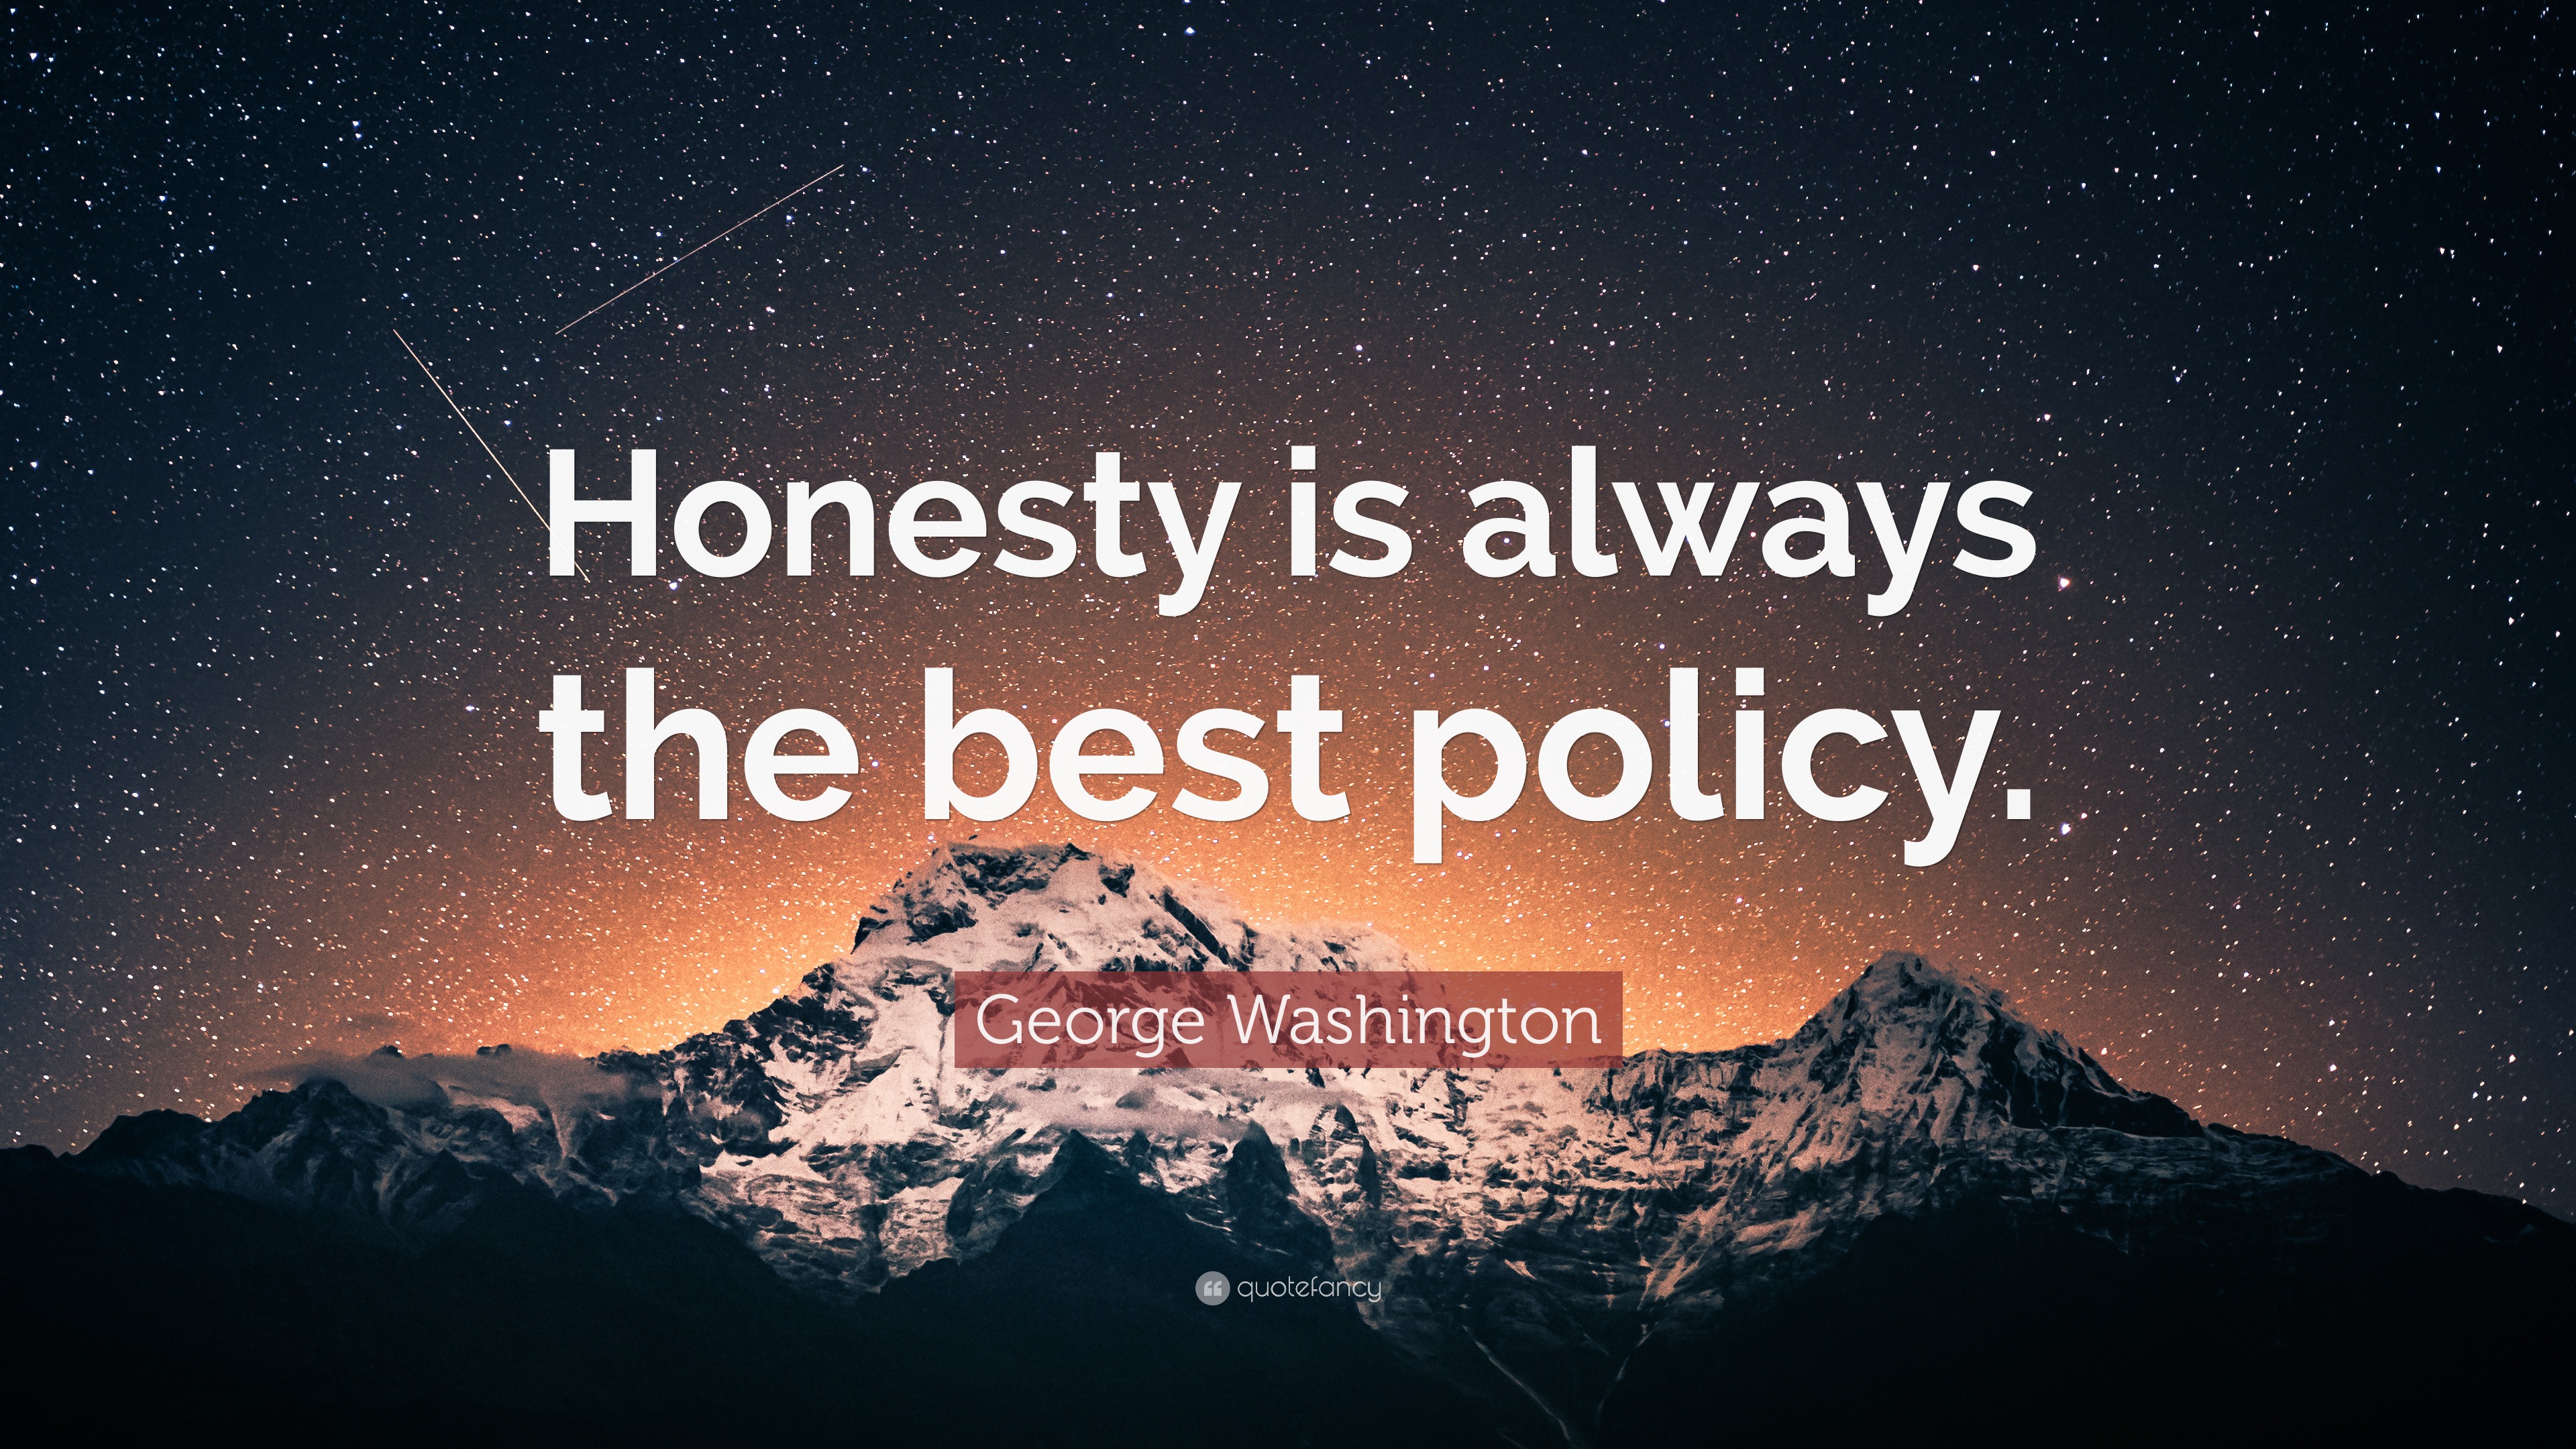 George Washington Quote: “Honesty is always the best policy.” (12